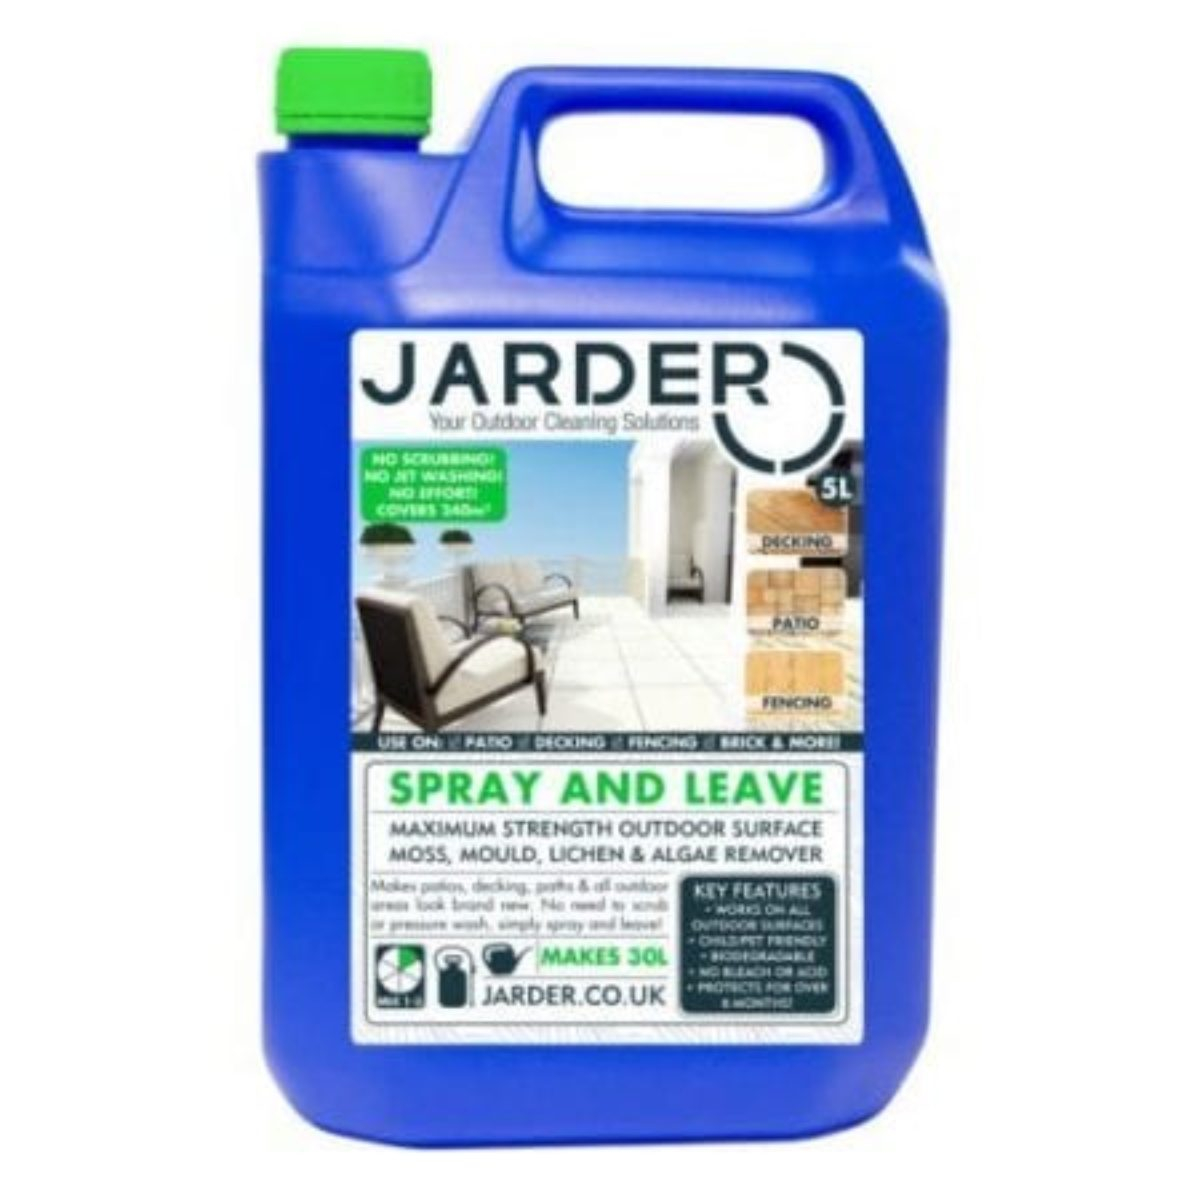 10 Best Patio Cleaner Reviews The Top Rated Models In 2020 for measurements 1200 X 1200